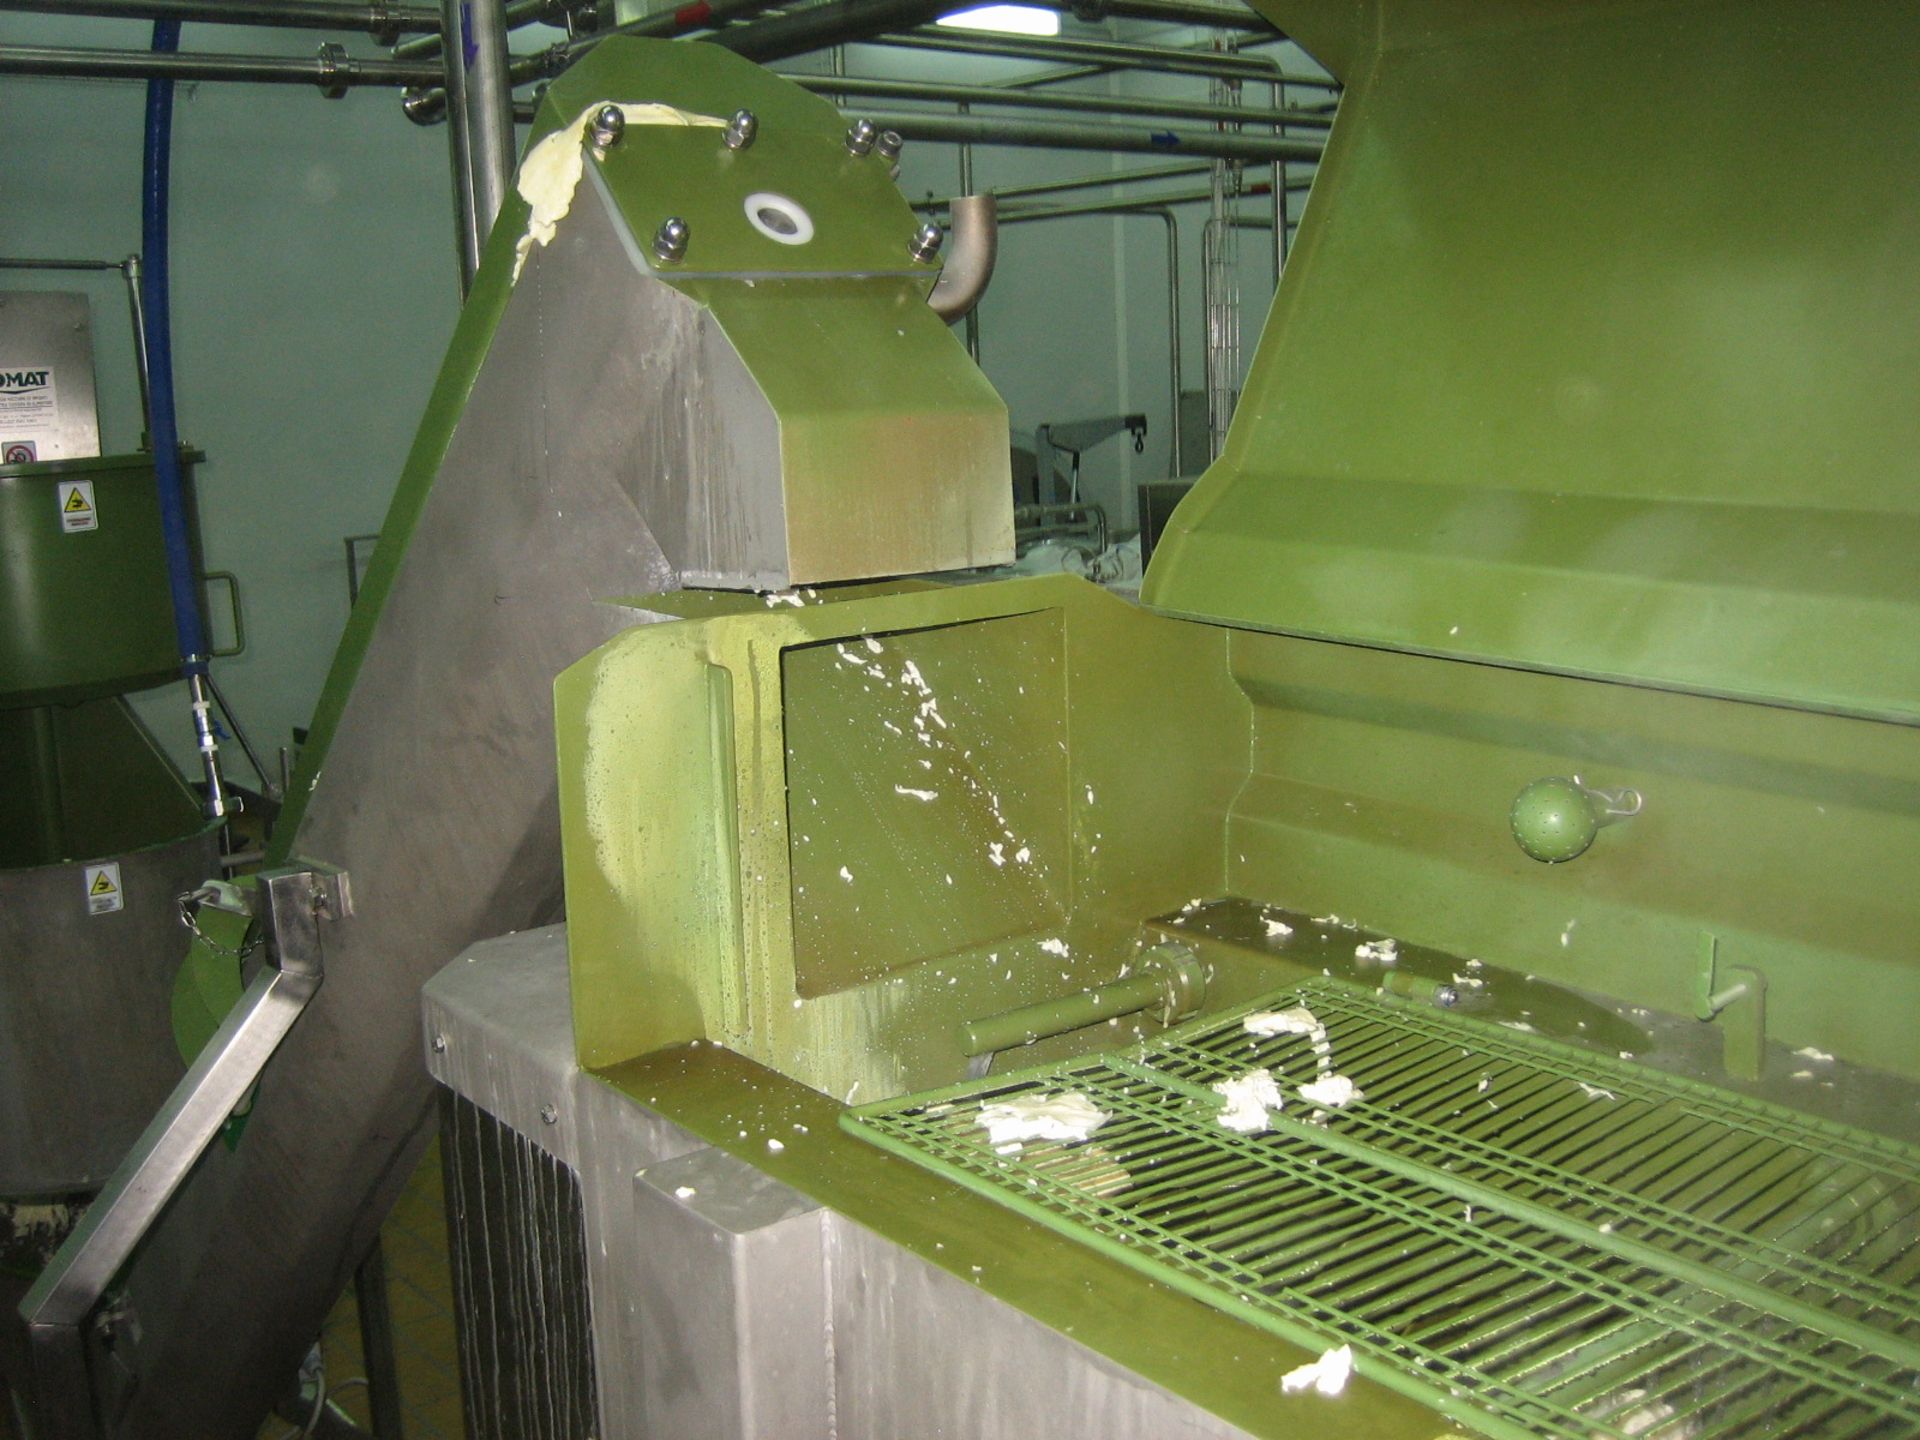 2X COMAT PROCESSING LINES FOR MOZZARELLA CHEESE TO PRODUCE MOZZARELLA STICKS AND MOZZARELLA BLOCKS - Image 6 of 11